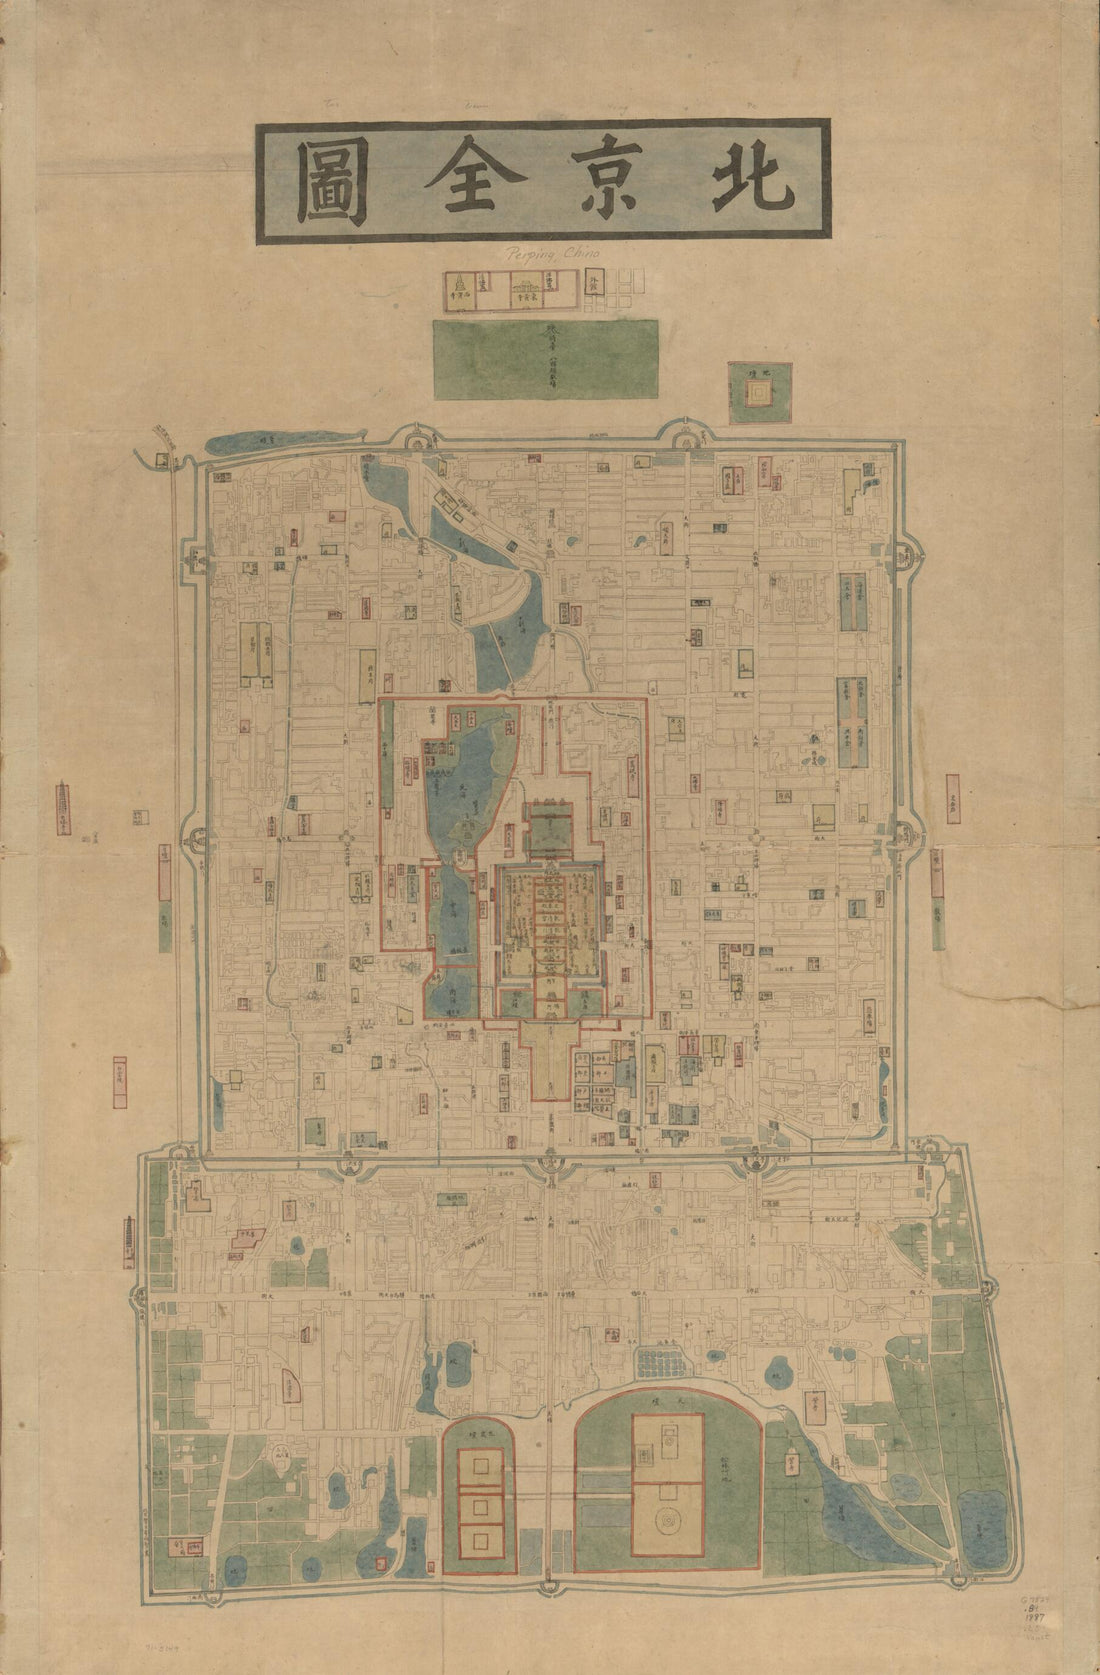 This old map of Beijing Quan Tu. (北京全图。, Complete Map of Beijing) from 1861 was created by Mingzhi LI in 1861